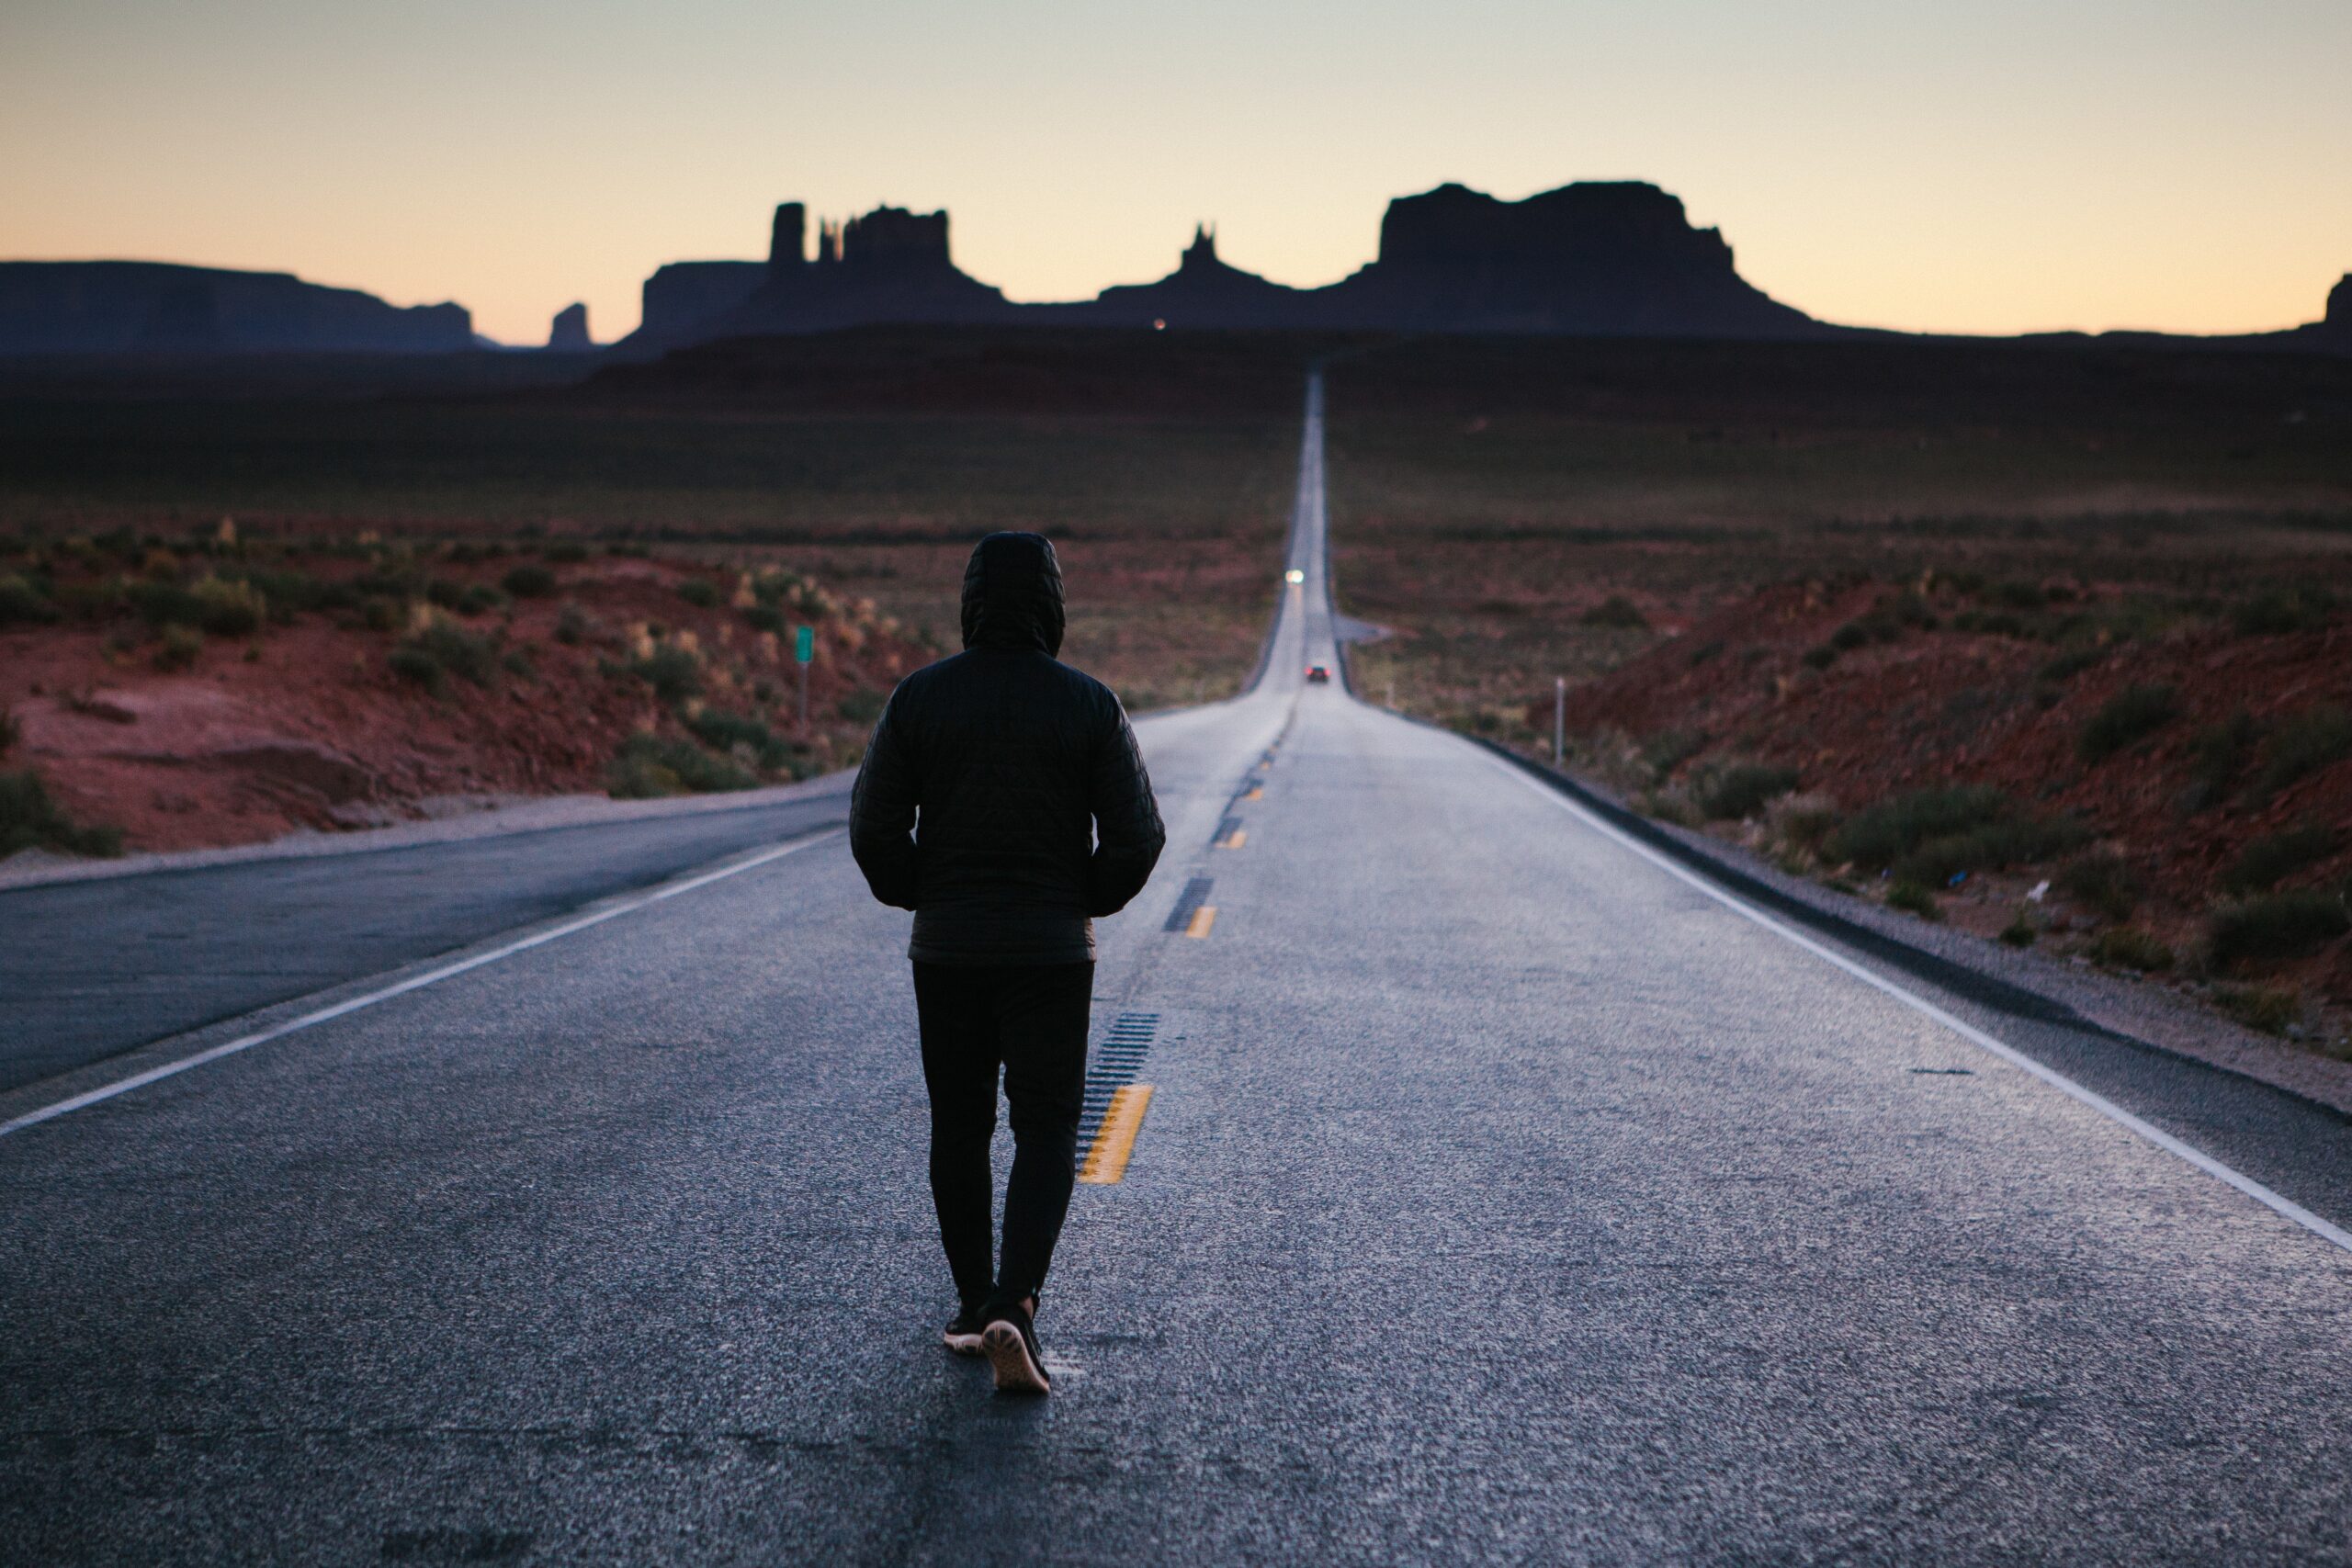 Hooded person walking into the sunset along a deserted country road